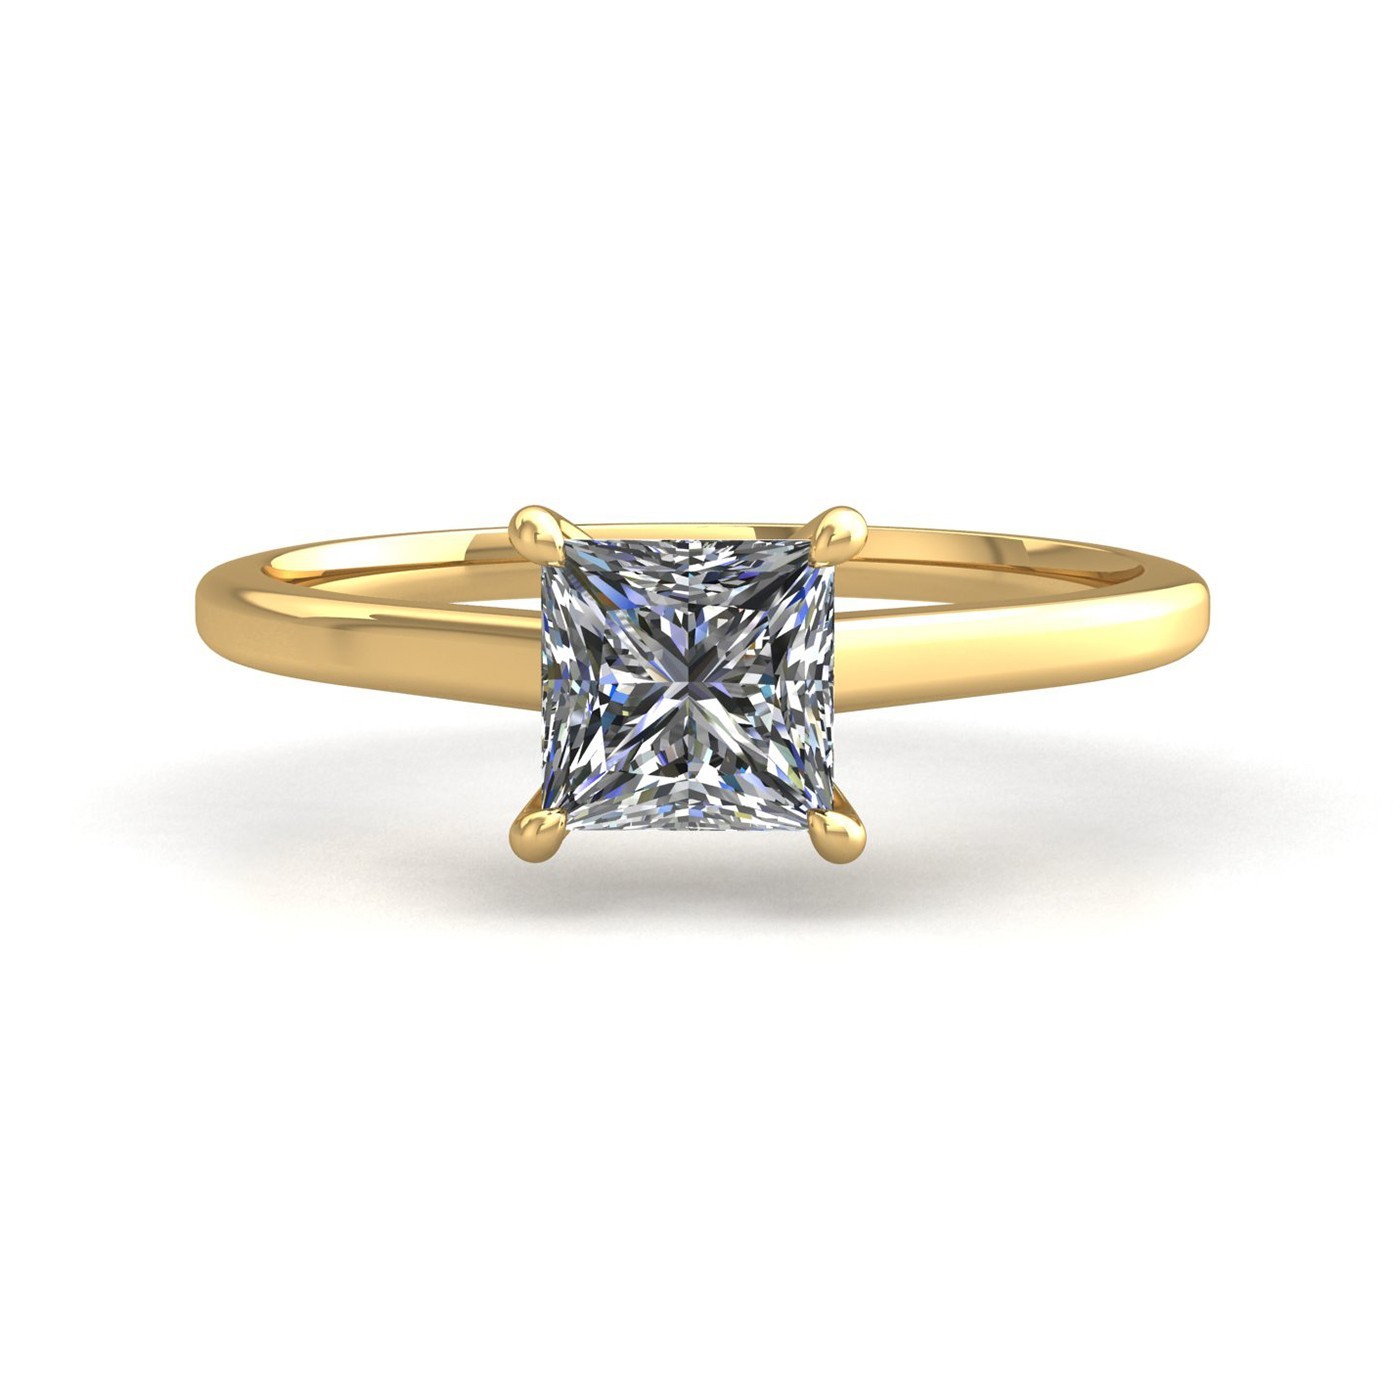 18k yellow gold  1,00 ct 4 prongs solitaire princess cut diamond engagement ring with whisper thin band Photos & images